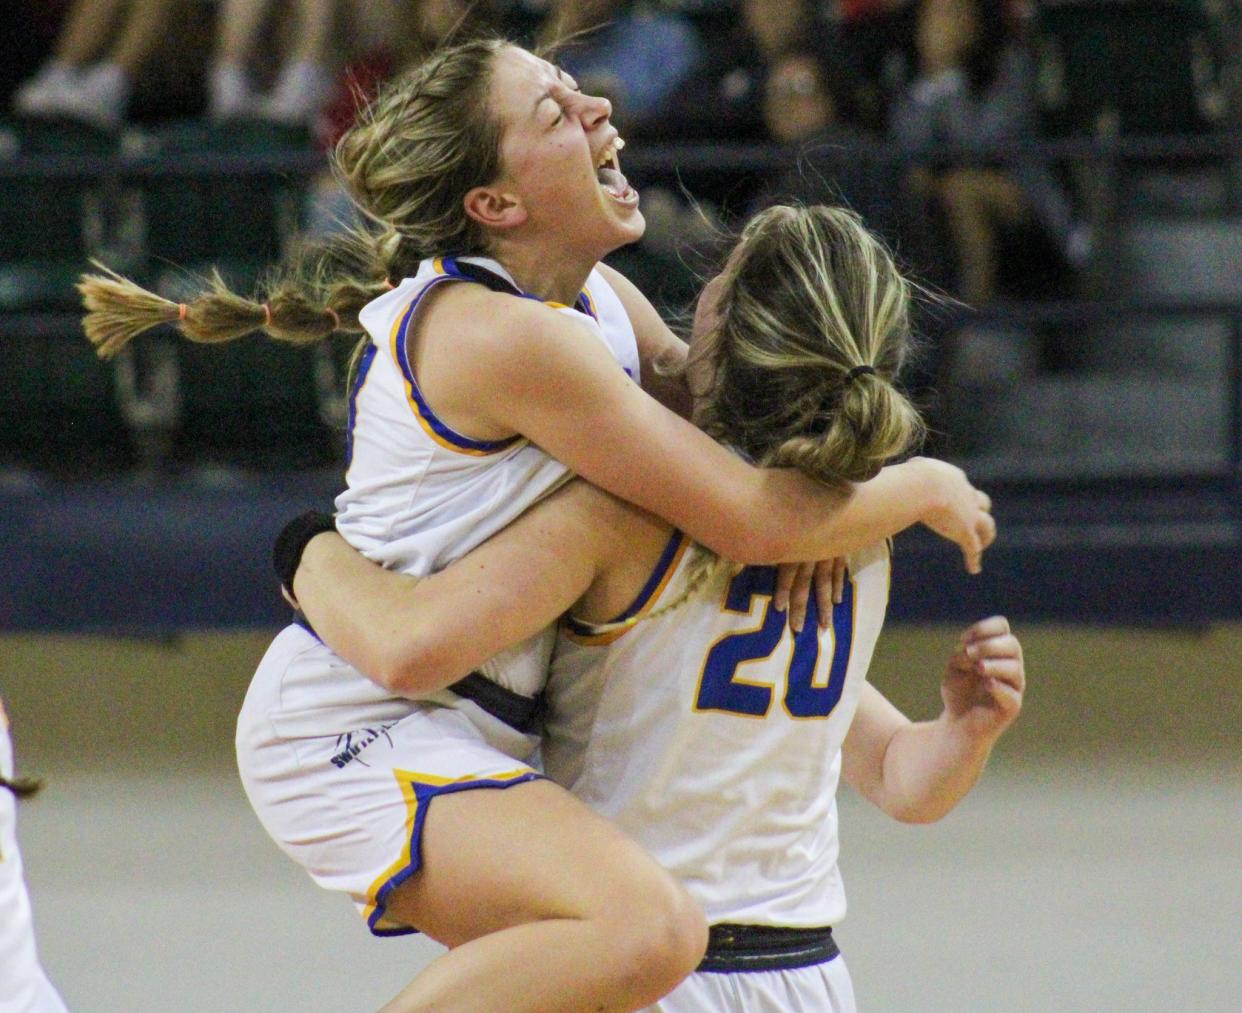 Presley Wheeler jumps into the arms of Iris Schilderink after Nazareth's 26-24 win over Claude in the Region I-1A championship girls basketball game in the Texan Dome at Levelland on Saturday, Feb. 25, 2023.